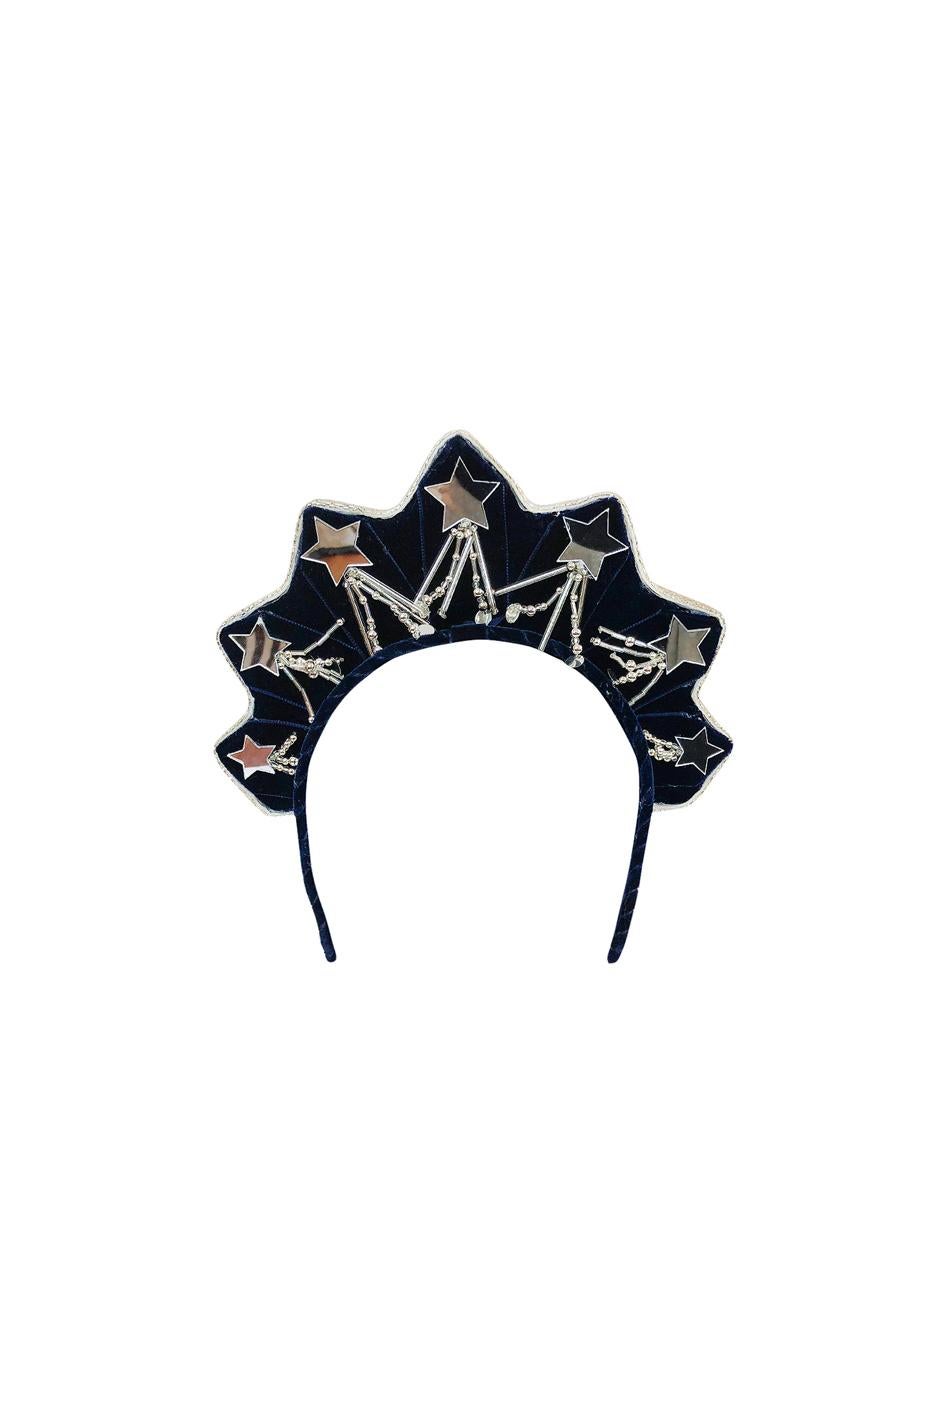 I am extremely pleased to launch this exclusive collection of headpieces by the talented Lucia Echavarría of the Magnetic Midnight label. This is the first of a series of collaborations that will draw inspiration from some of the most famous